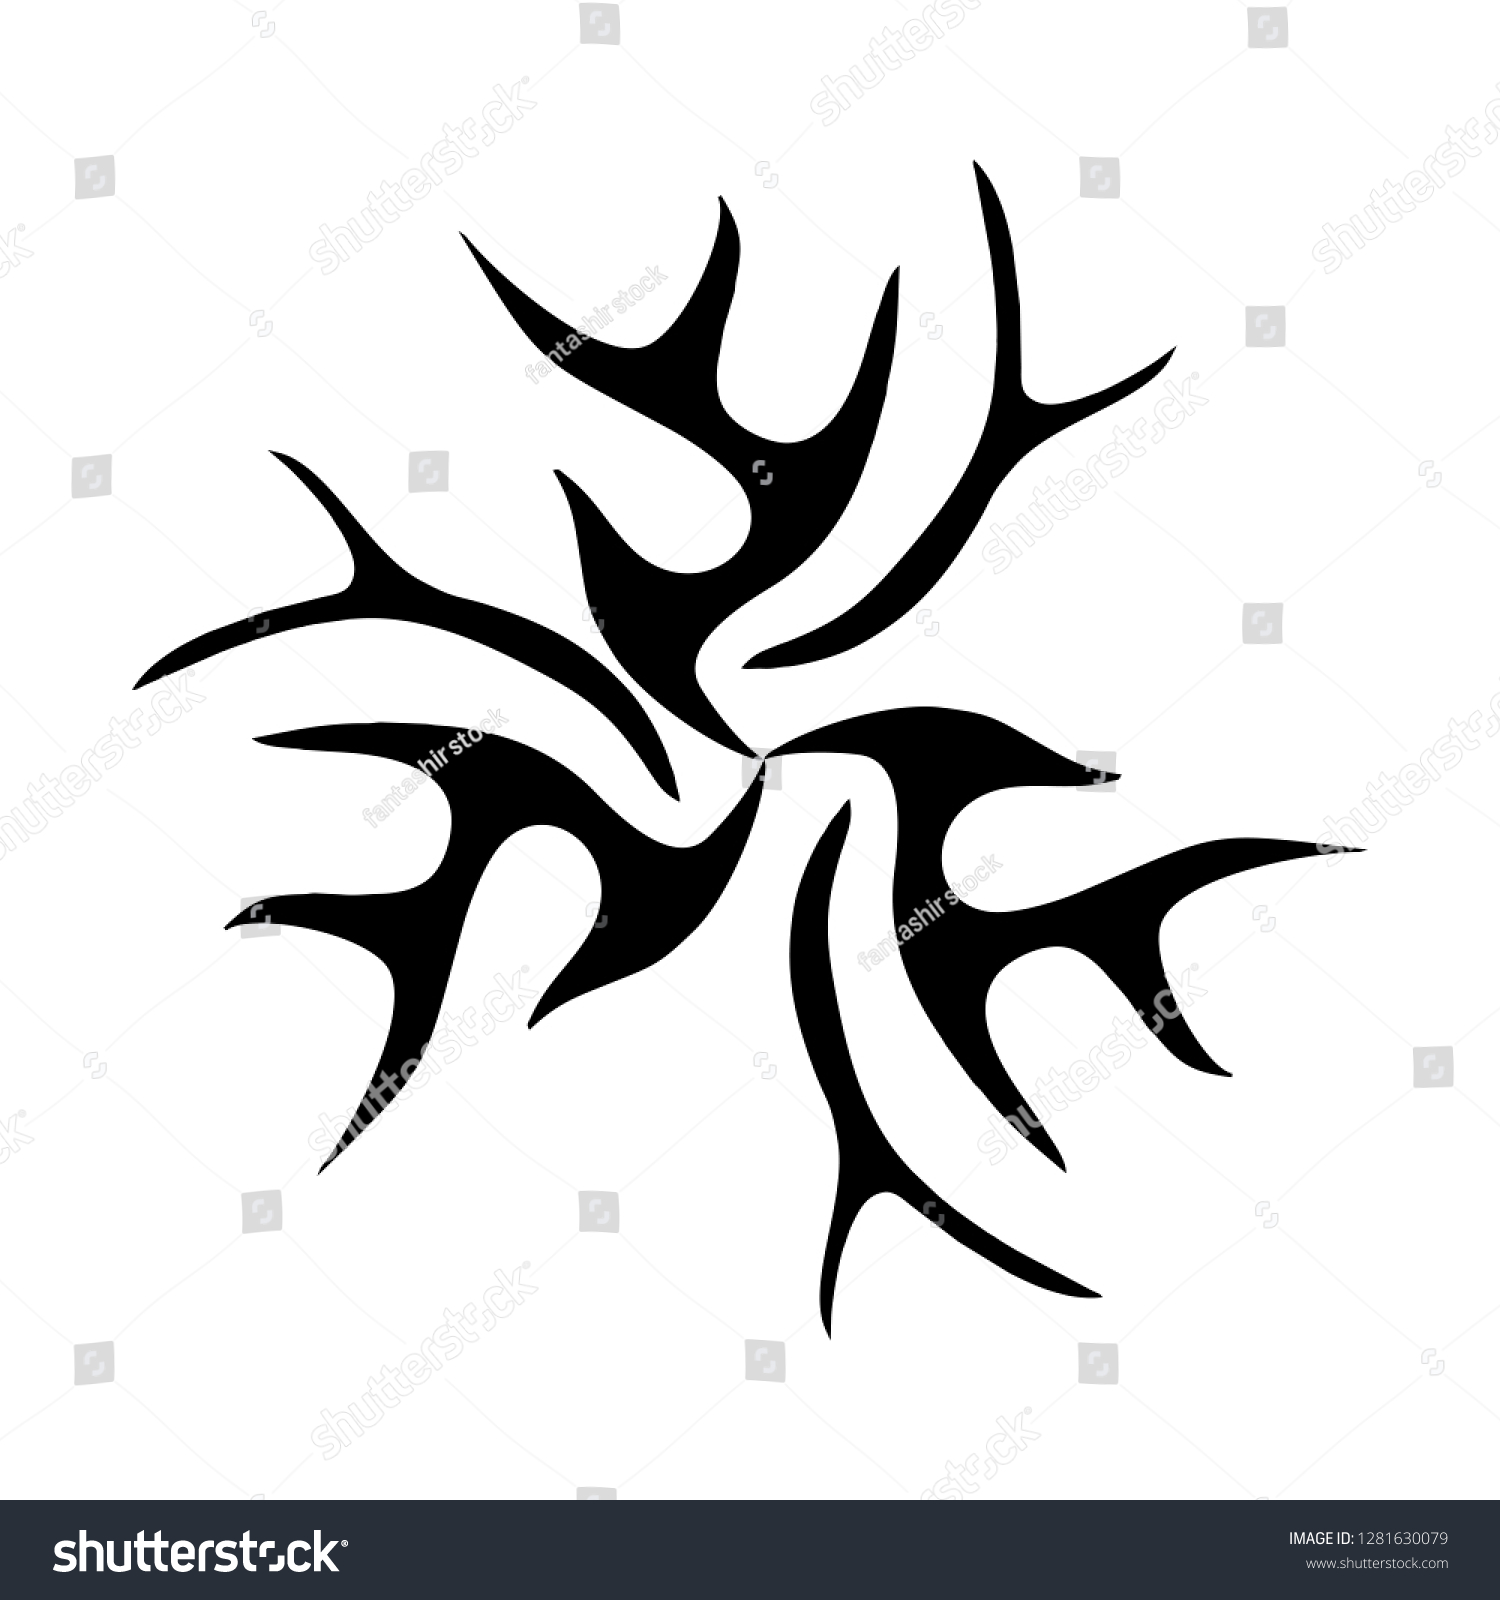 Ethnic Abstract Tattoo Tribal Vector Design Stock Vector Royalty Free 1281630079